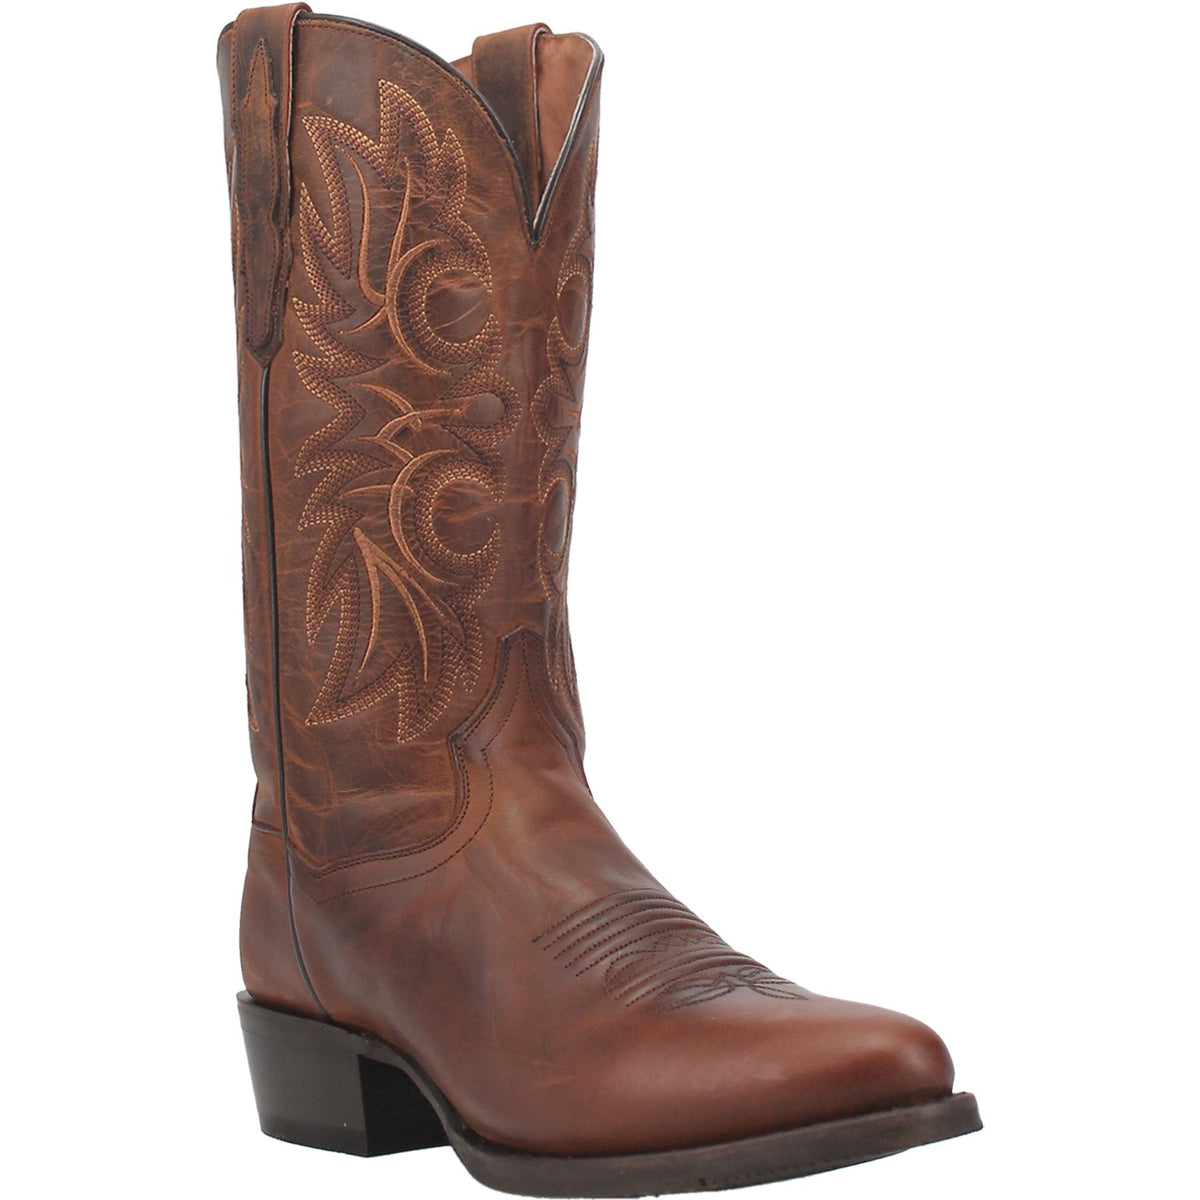 COTONWOOD LEATHER BOOT Cover